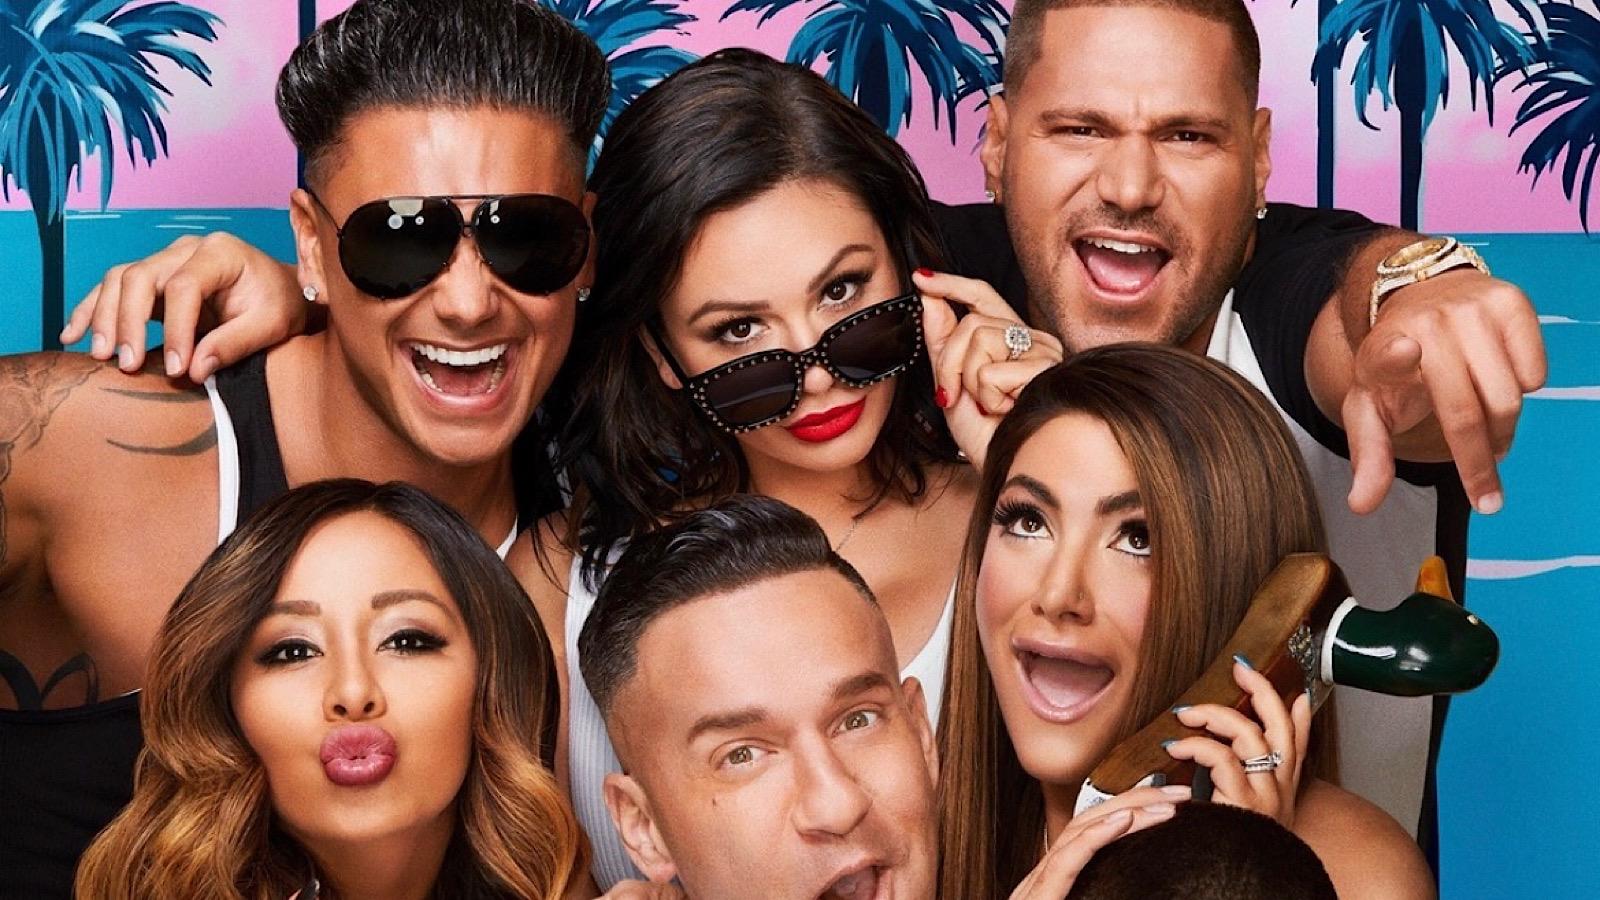 Jersey Shore's Mike the Situation explains why he welcomed Ronnie